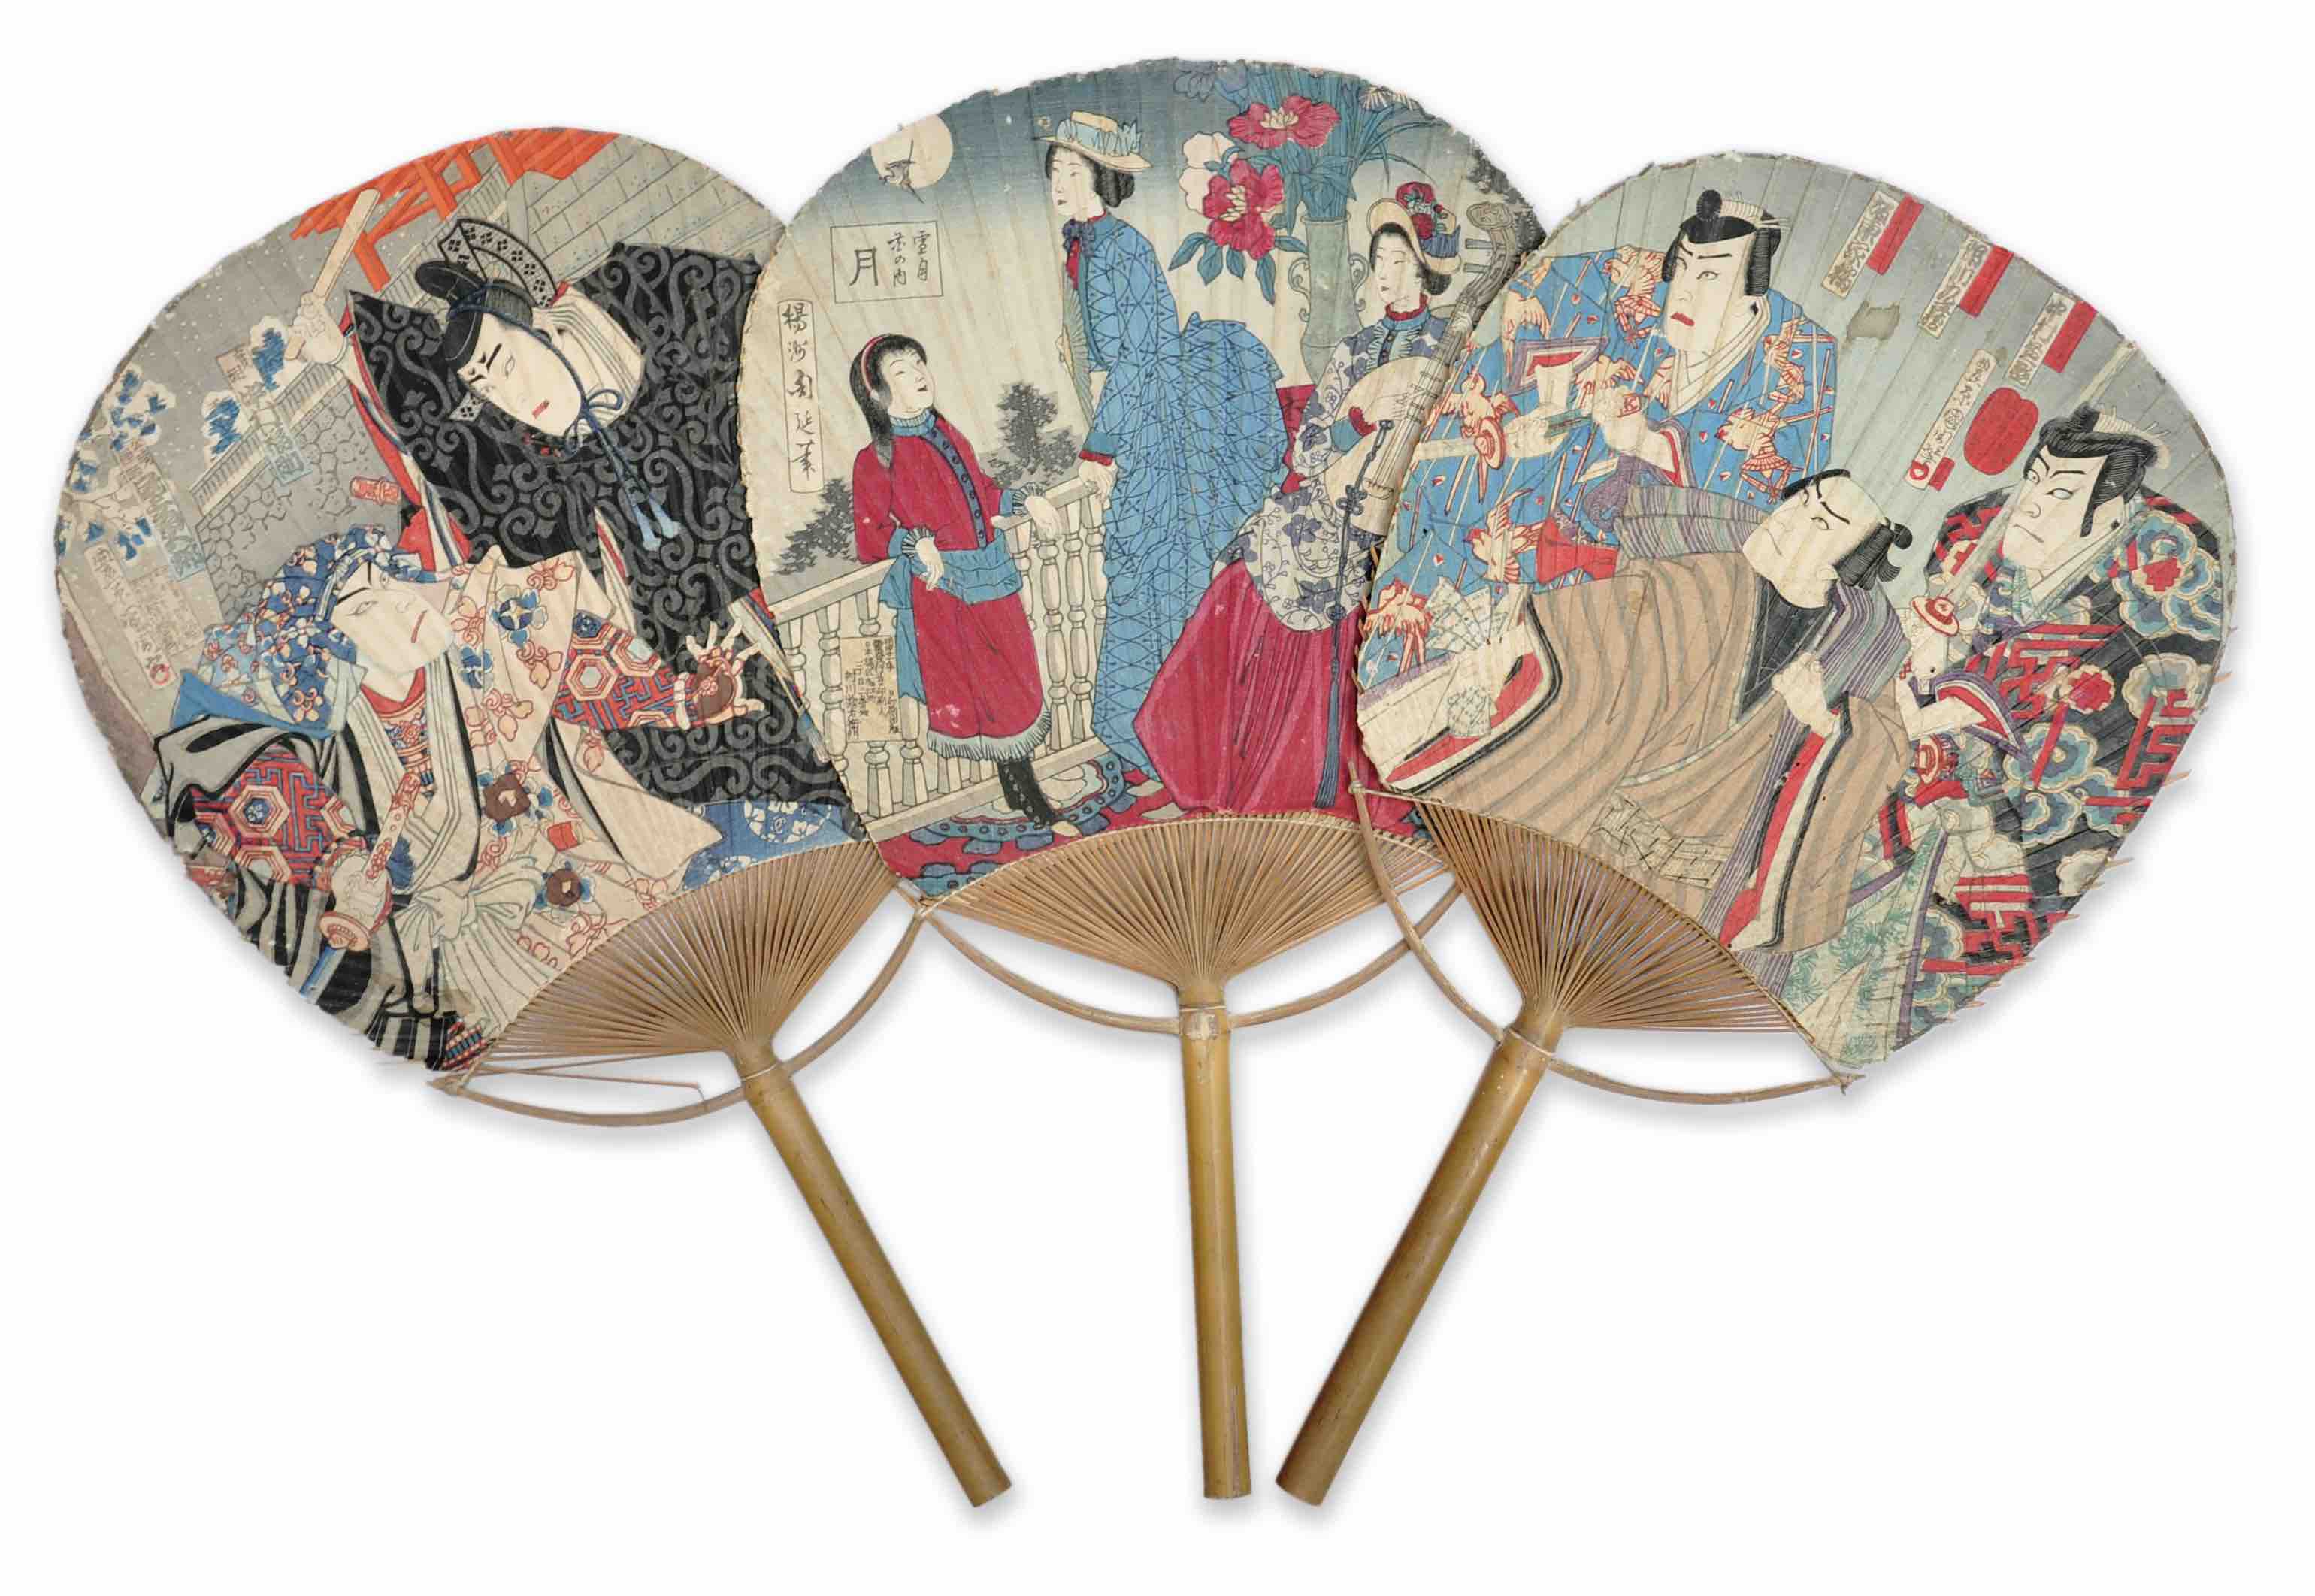 JAPANESE PAPER FANS]. -  [Three ukiyo-e woodblock-printed paper fans depicting kabuki actors and one with three ladies in Western clothing]. Published by Murakawa Soemon in Tokyo. 1888, 1892 and 1893.